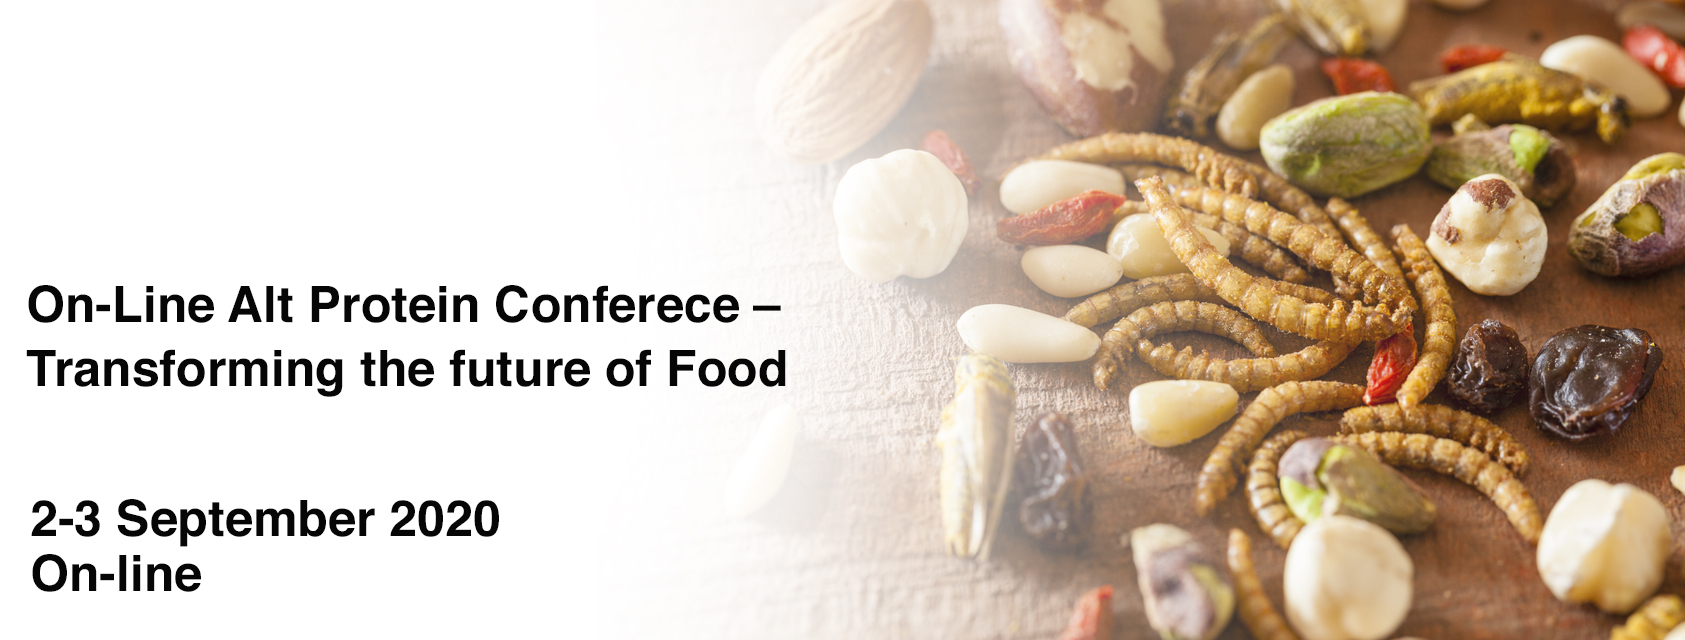 On-Line Alt Protein Conferece – Transforming the future of Food